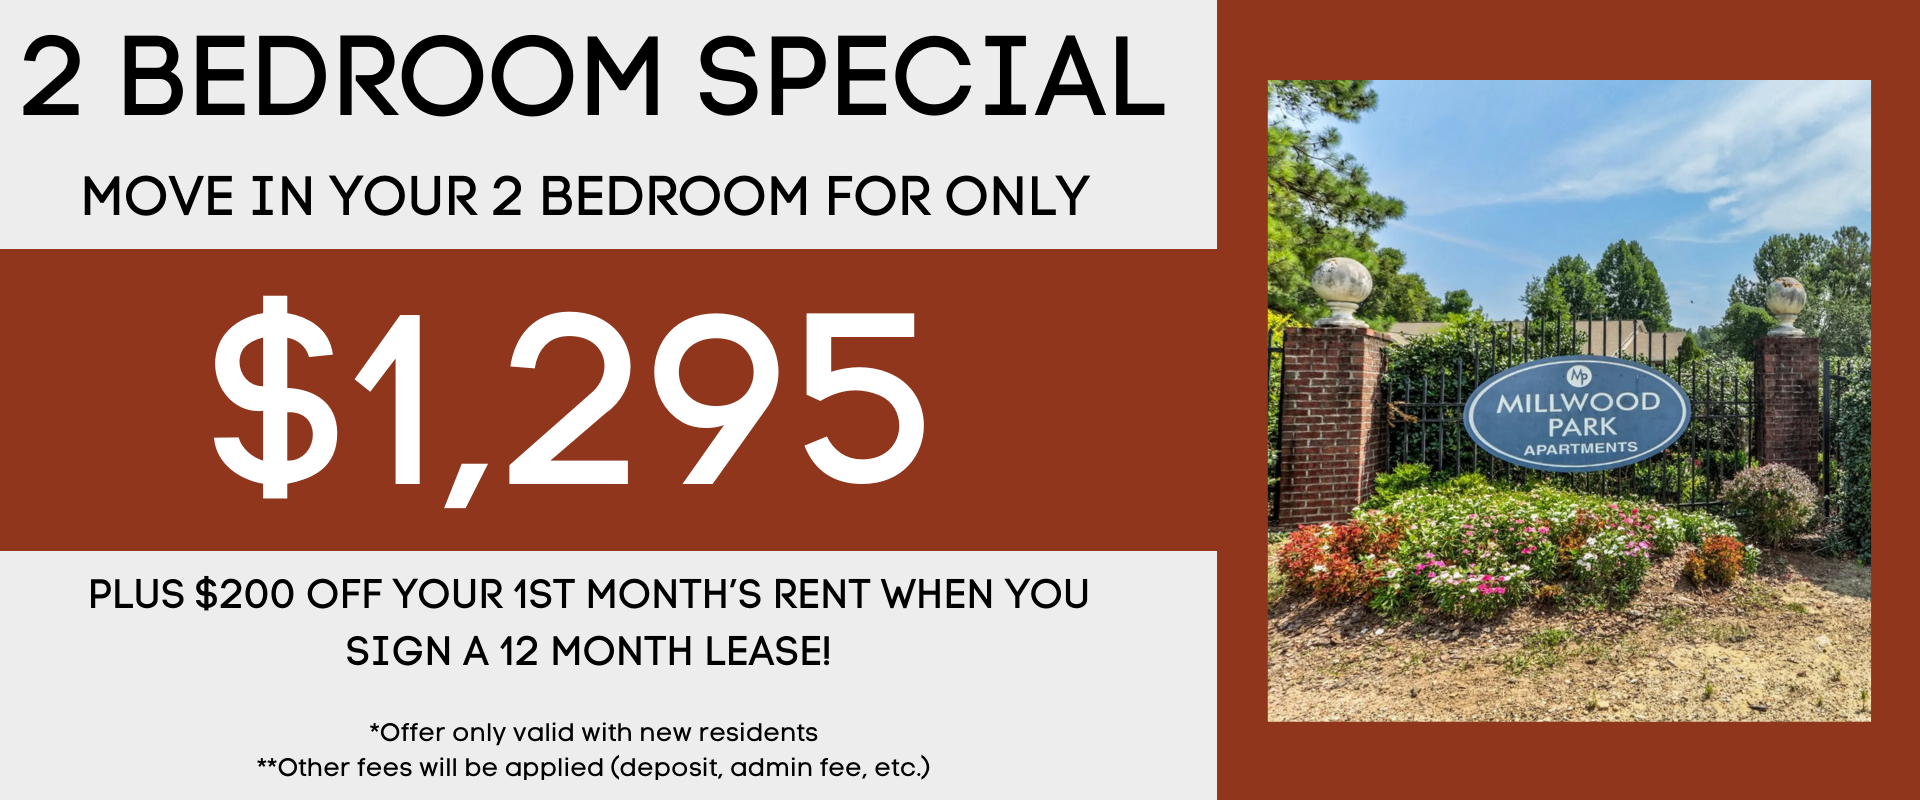 MOVE IN YOUR 2 BEDROOM FOR ONLY $1,295 PLUS $200 OFF YOUR 1ST MONTH’S RENT WHEN YOU  SIGN A 12 MONTH LEASE! *Offer only valid with new residents **Other fees will be applied (deposit, admin fee, etc.)